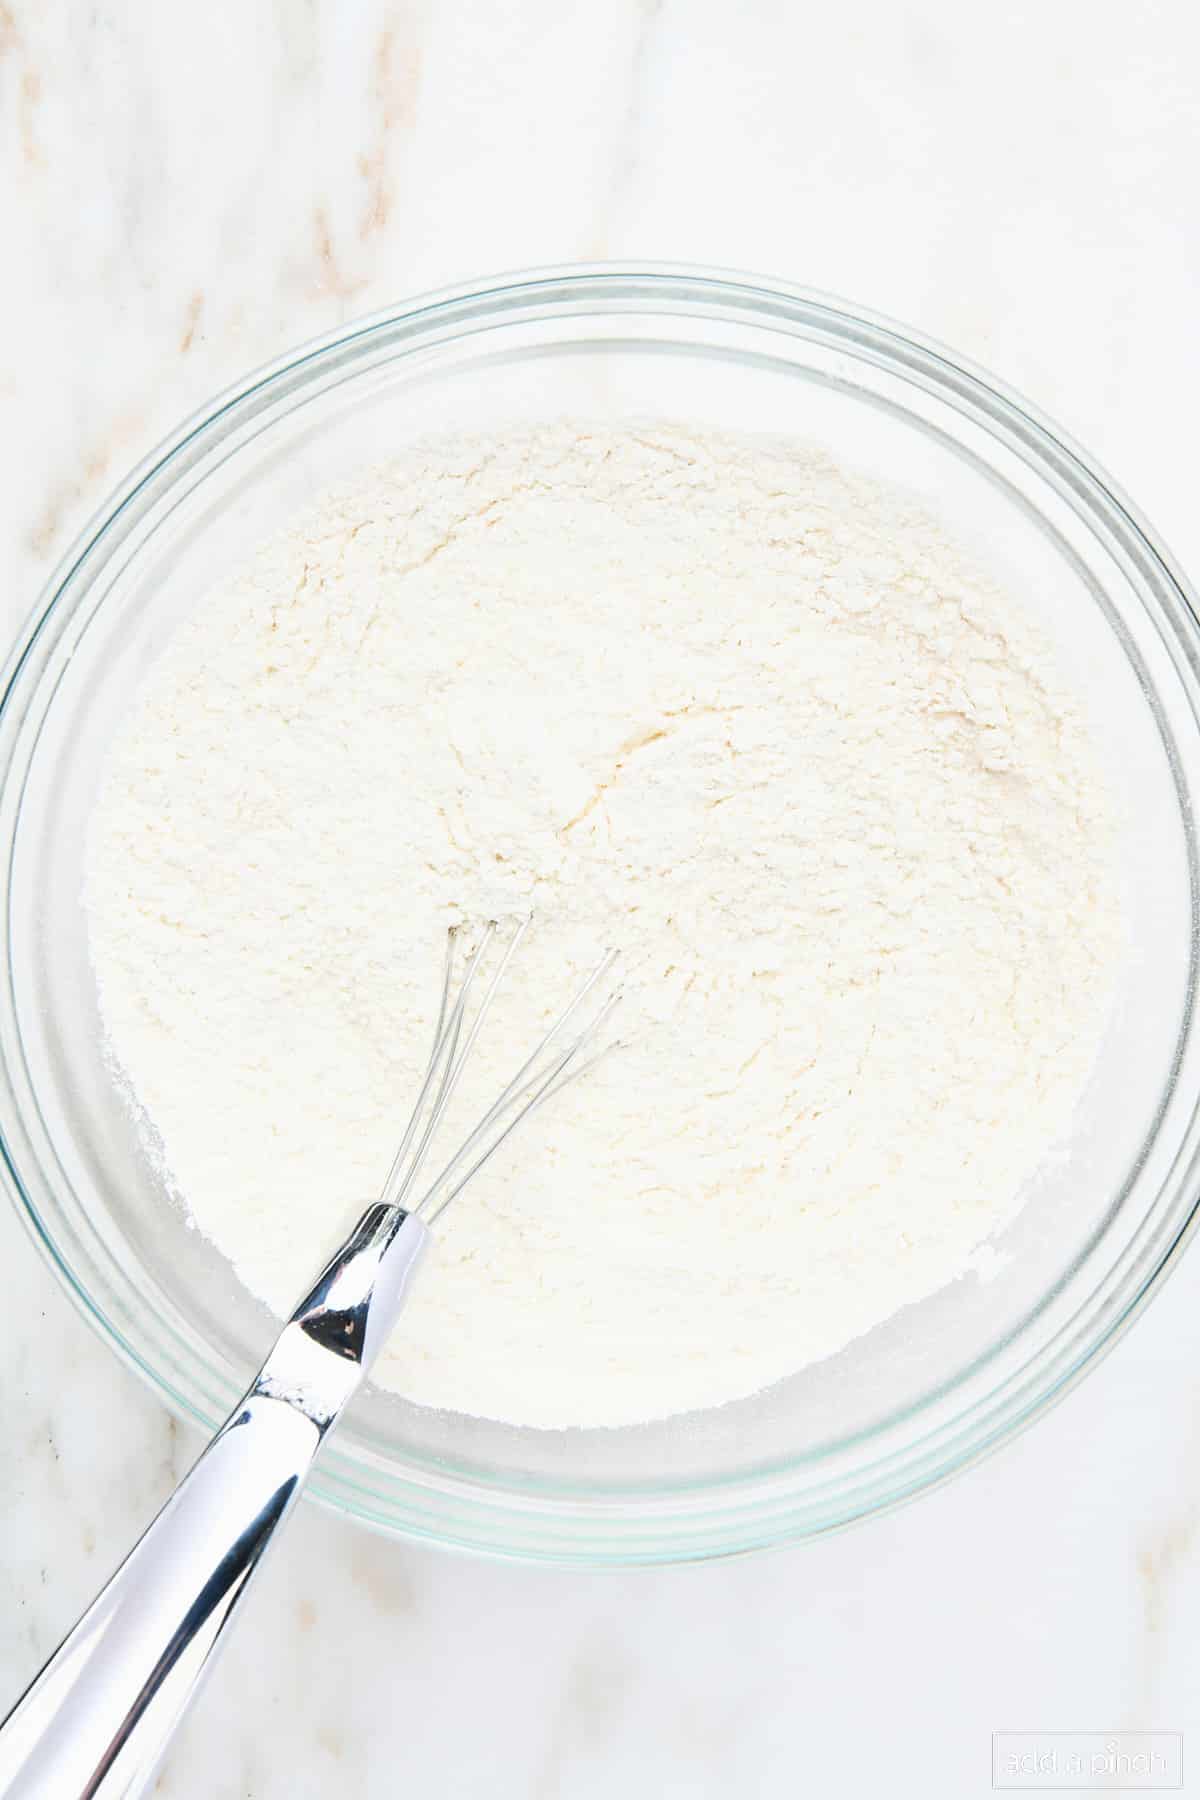 Dry ingredients whisked together in a glass bowl.